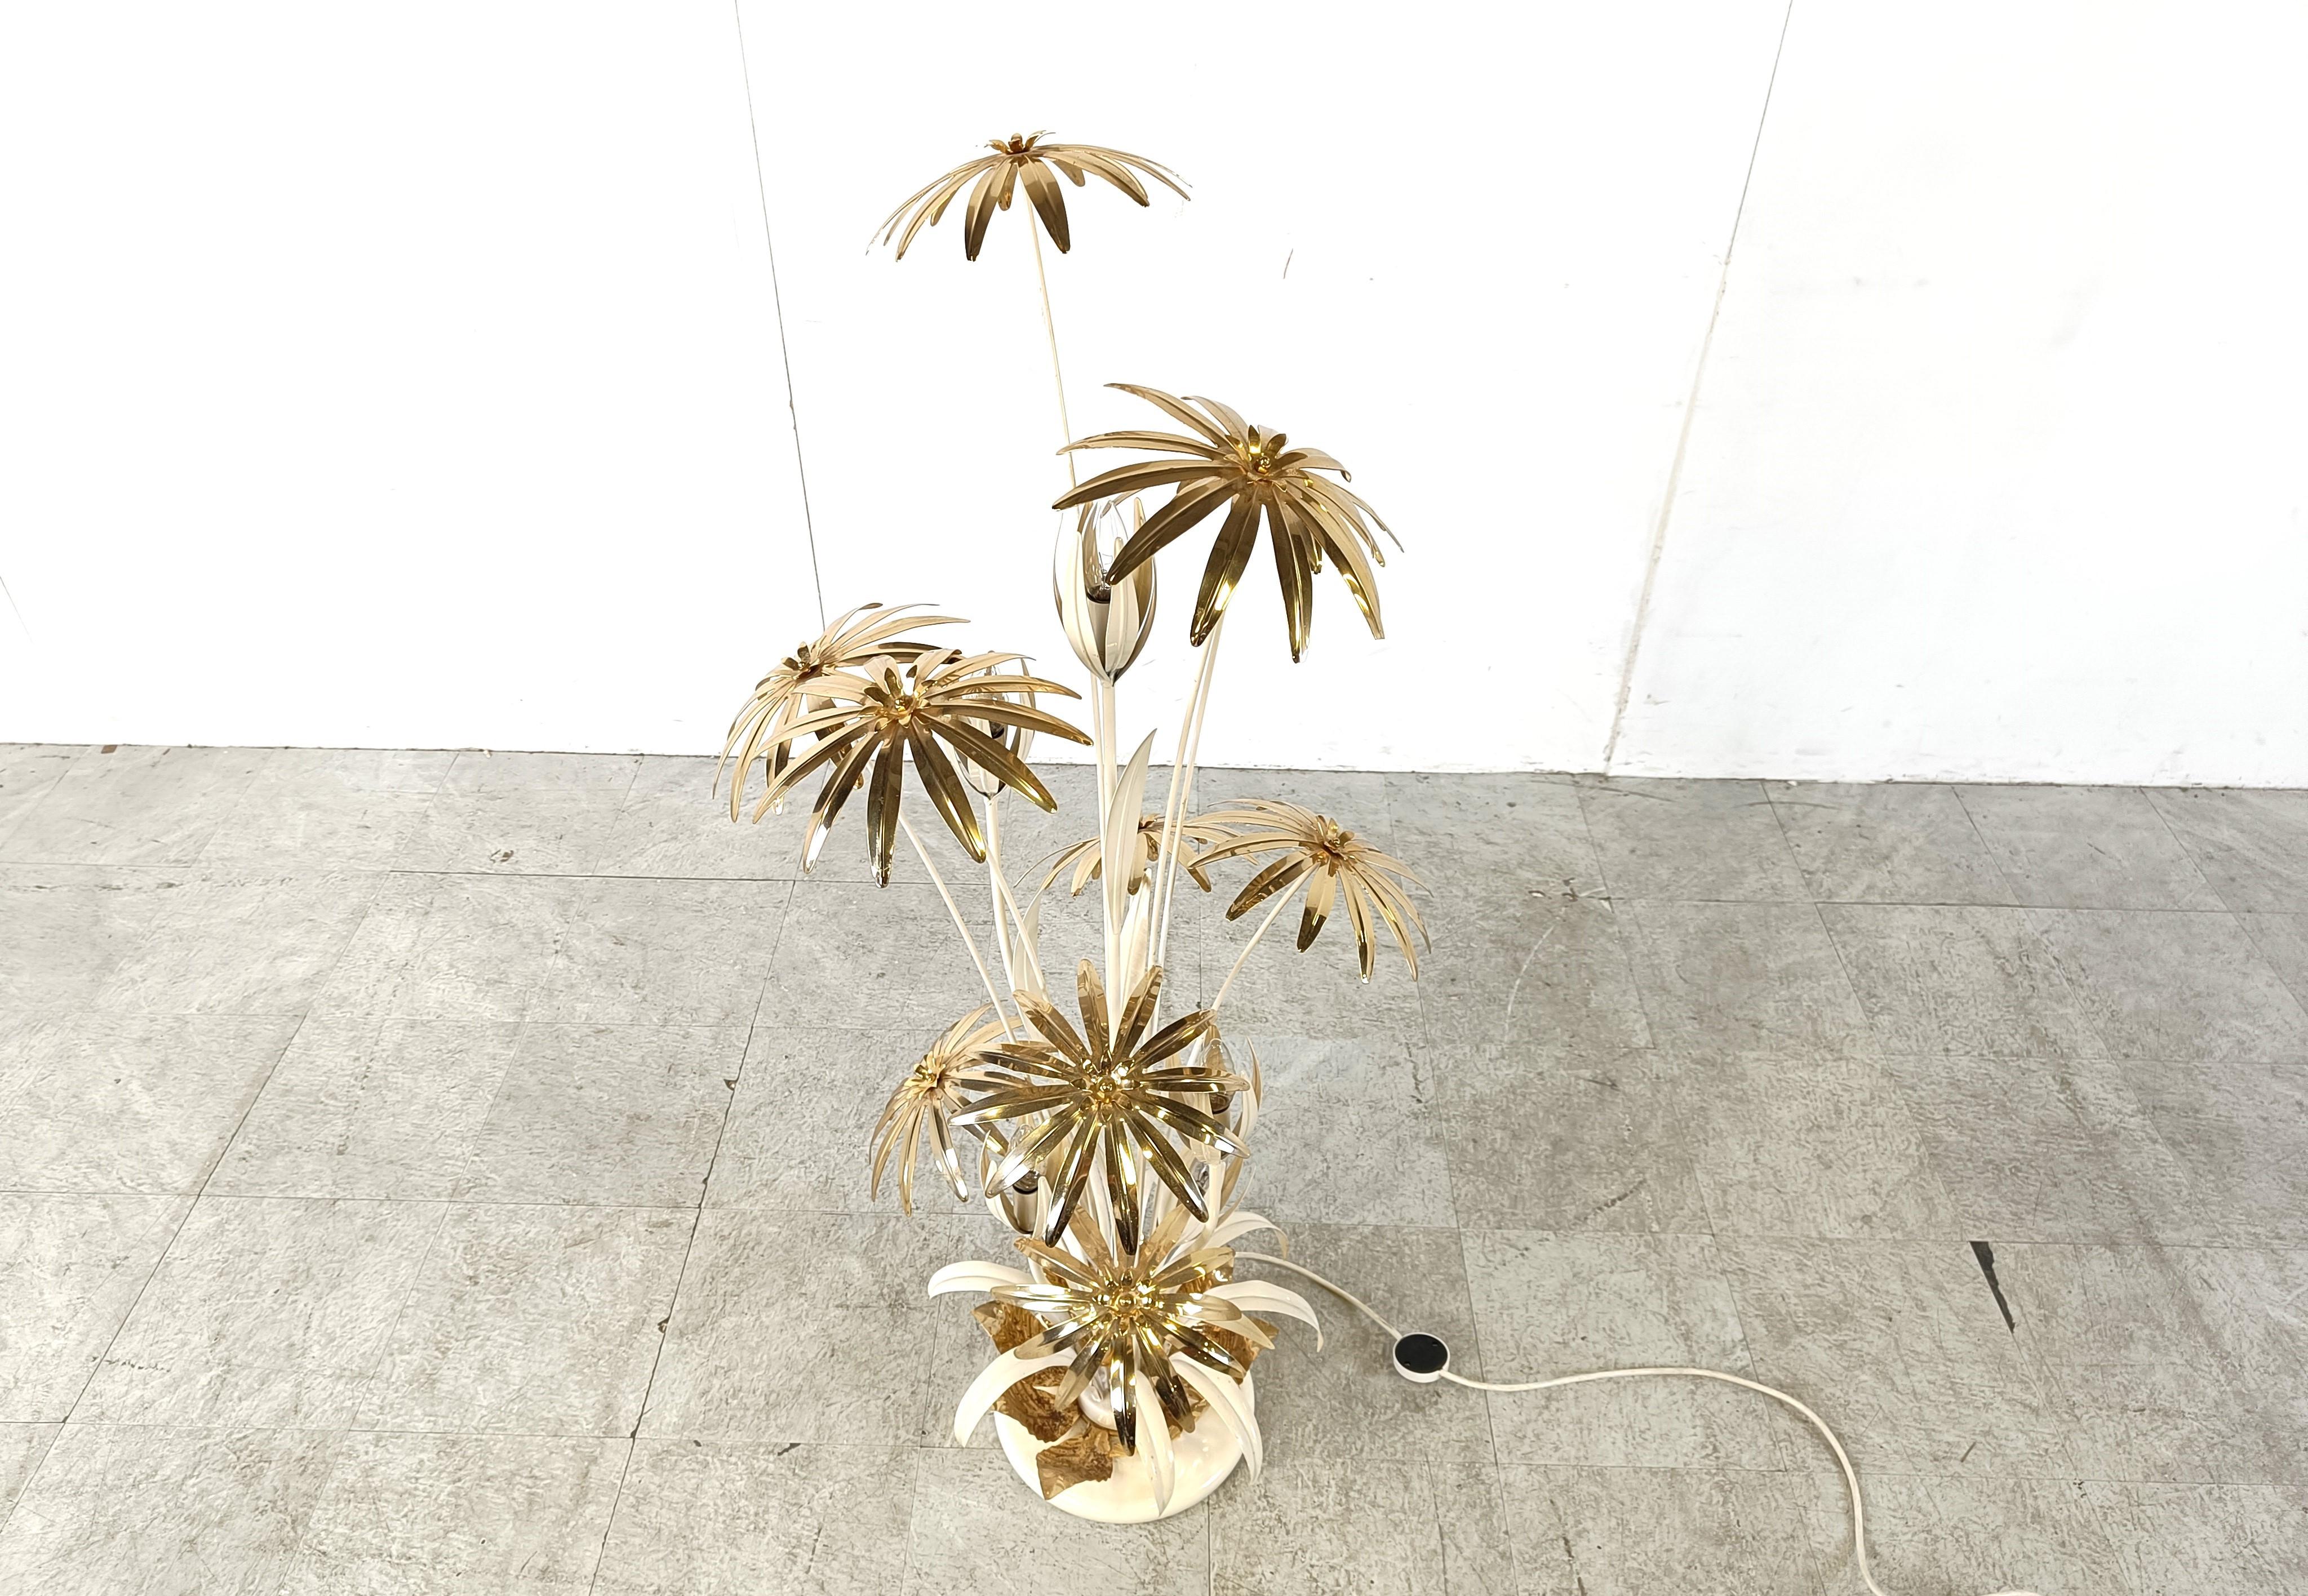 Large hollywood regency floor lamp by Hans Kögl.

Brass flowers and white metal stems.

The floor lamp emits an amazing light.

Perfect condition.

Comes with a foot switch.

Tested and ready to use with regular E14 light bulbs.

1970s -